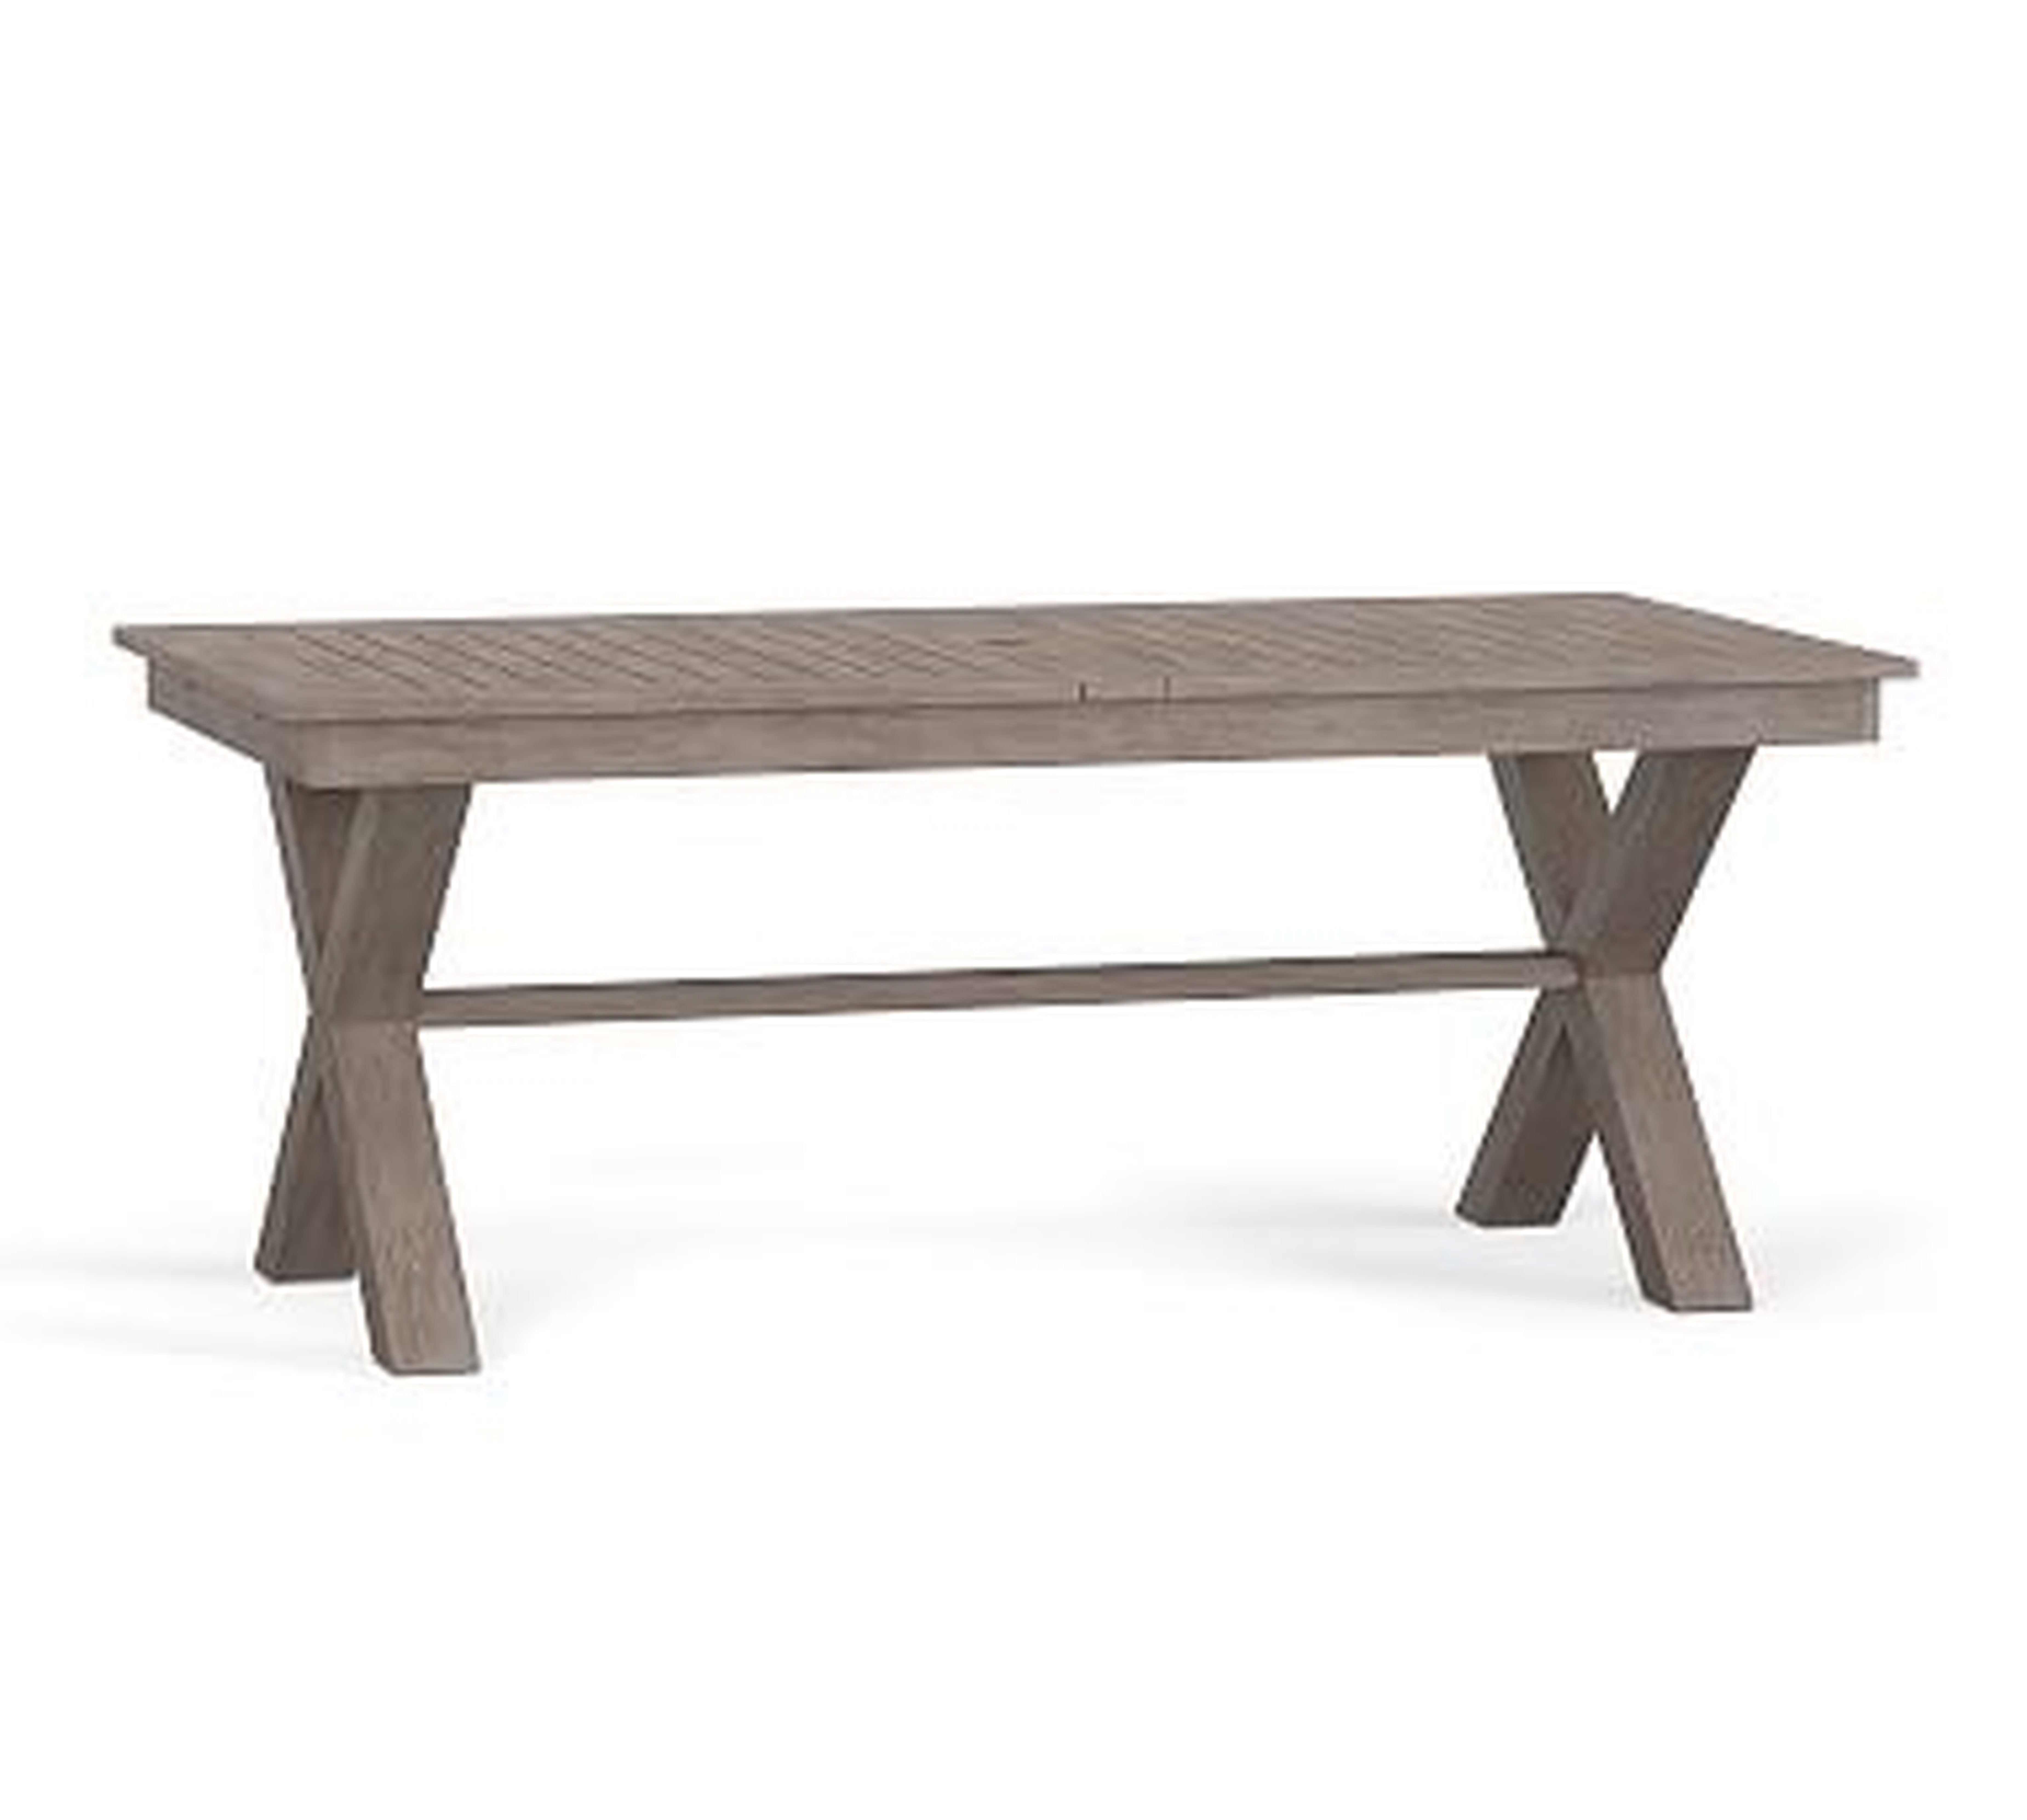 Indio Wood X-Base Rectangular Extending Outdoor Dining Table, Weathered Gray - Pottery Barn